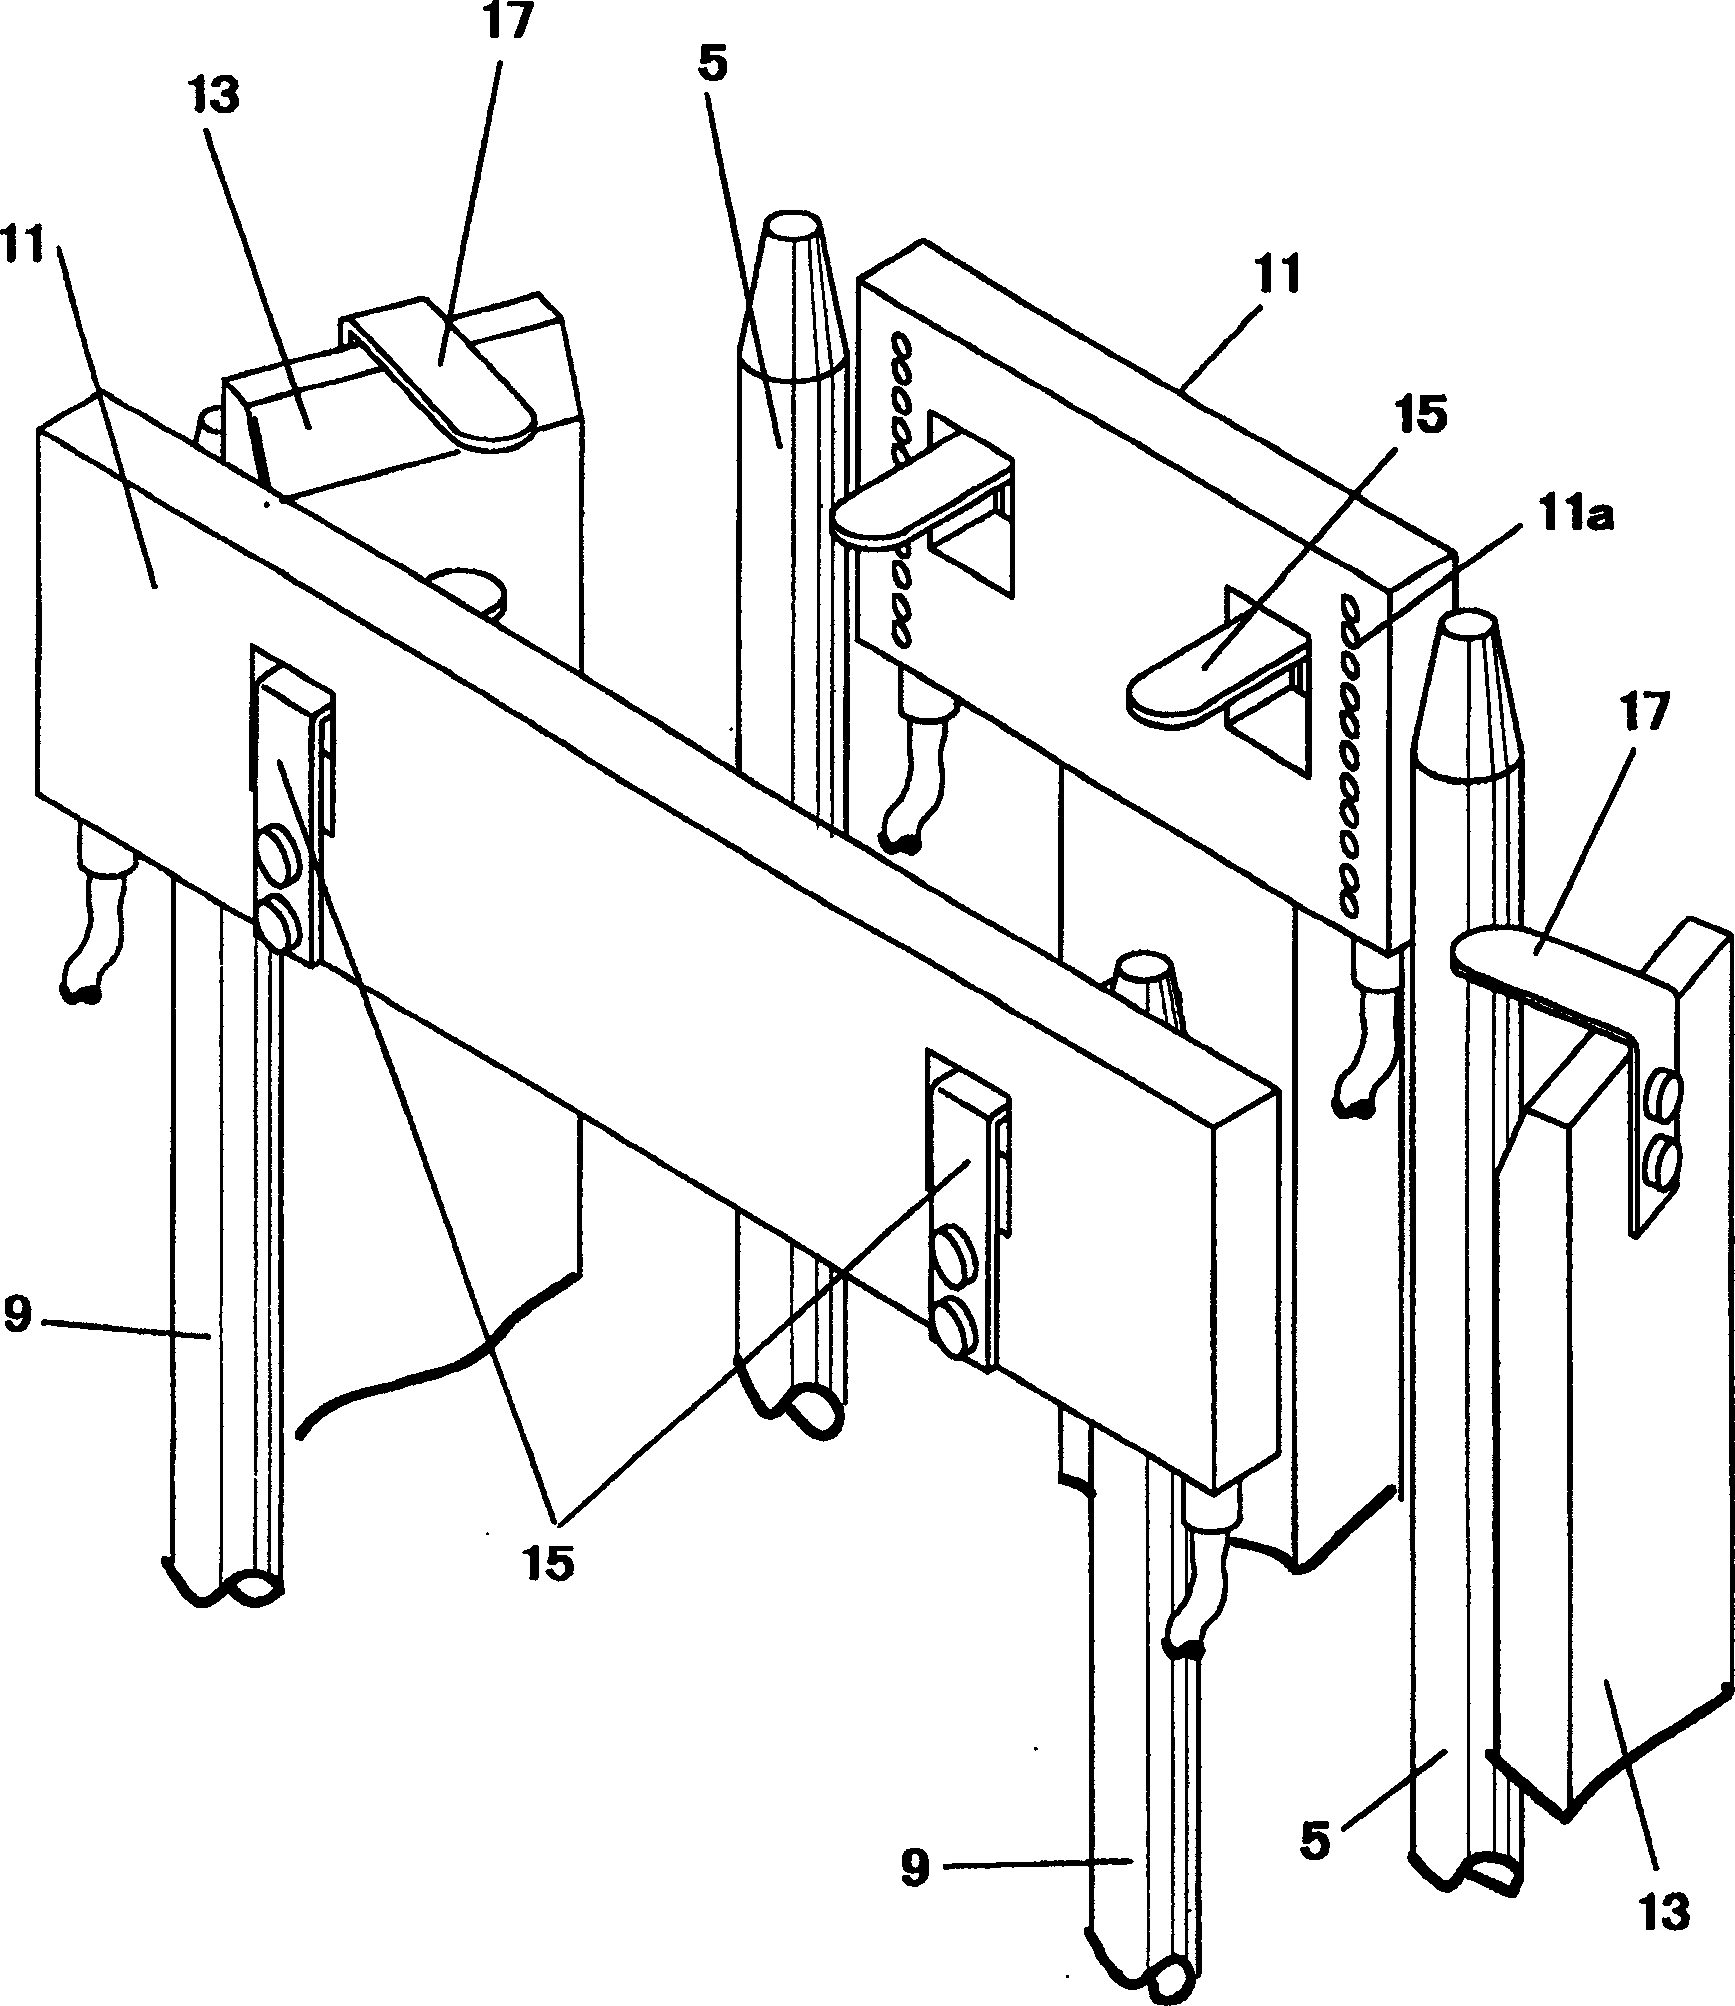 Device and method for drawing out sheets